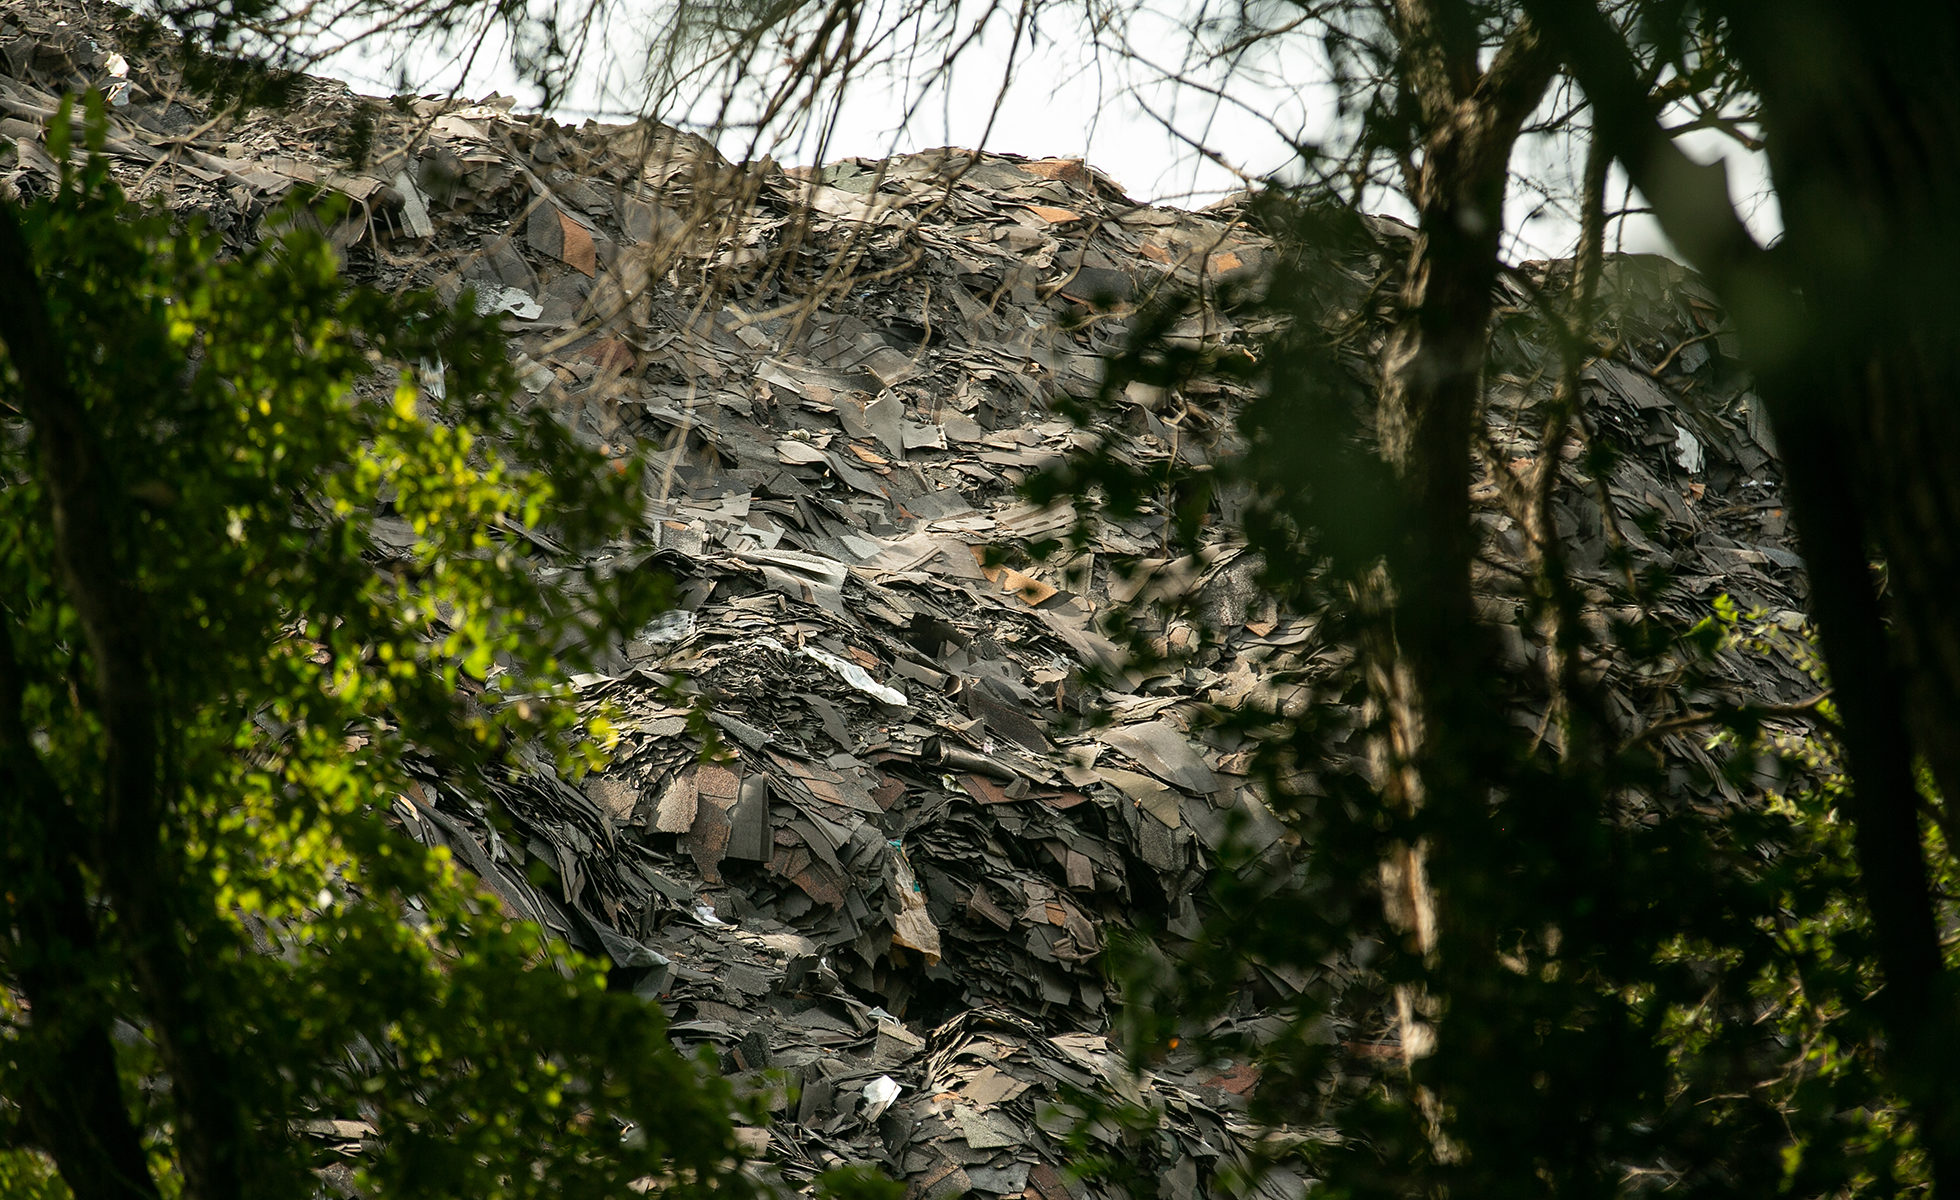 For years, Marsha Jackson has lived next door to Shingle Mountain, an illegal dump consisting of hundreds of tons of roof shingles.